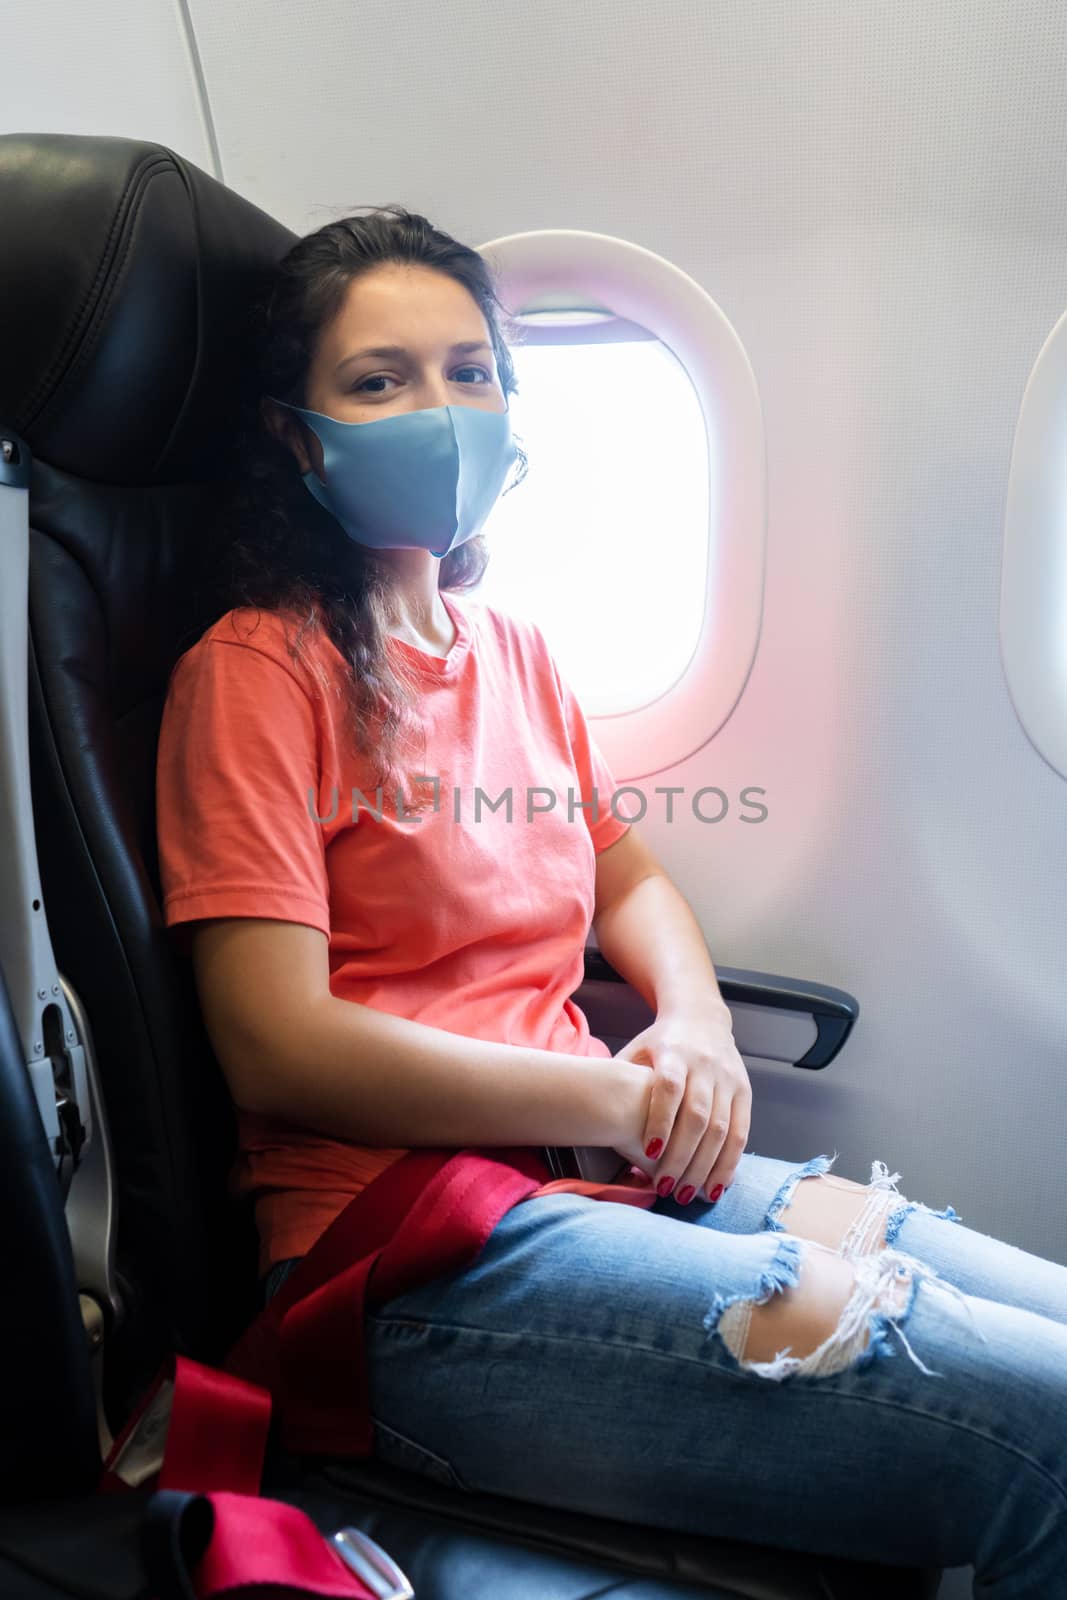 A girl in a medical mask on her face during a flight in the cabin. Air travel during a pandemic.